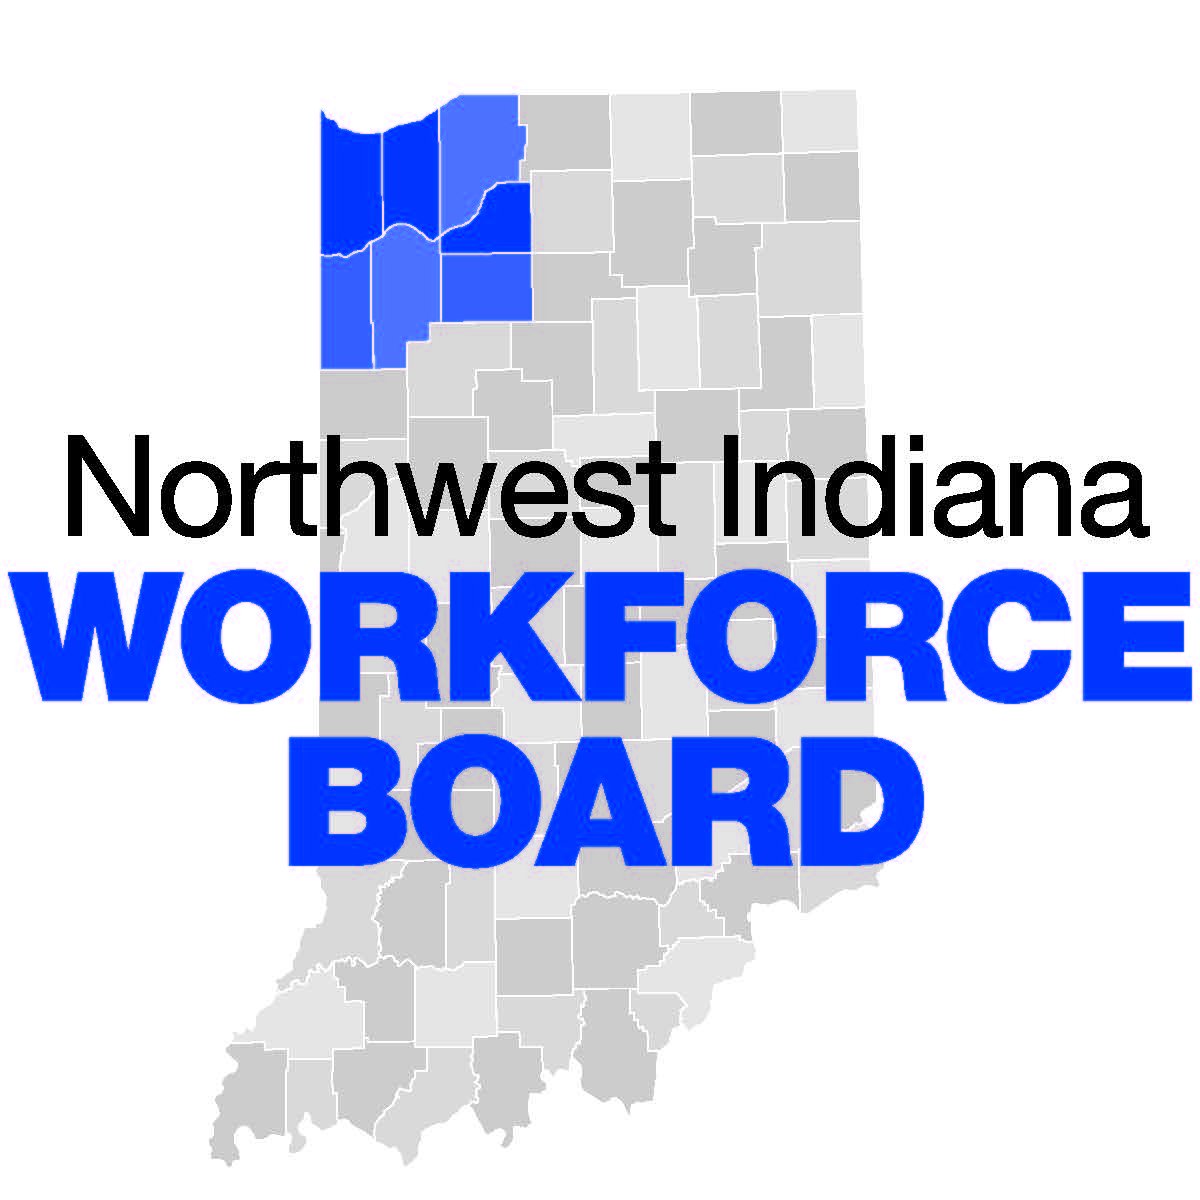 The NW Indiana Workforce Board is responsible for the strategic vision of workforce development and governance of the One Stop (WorkOne) system in NW Indiana.